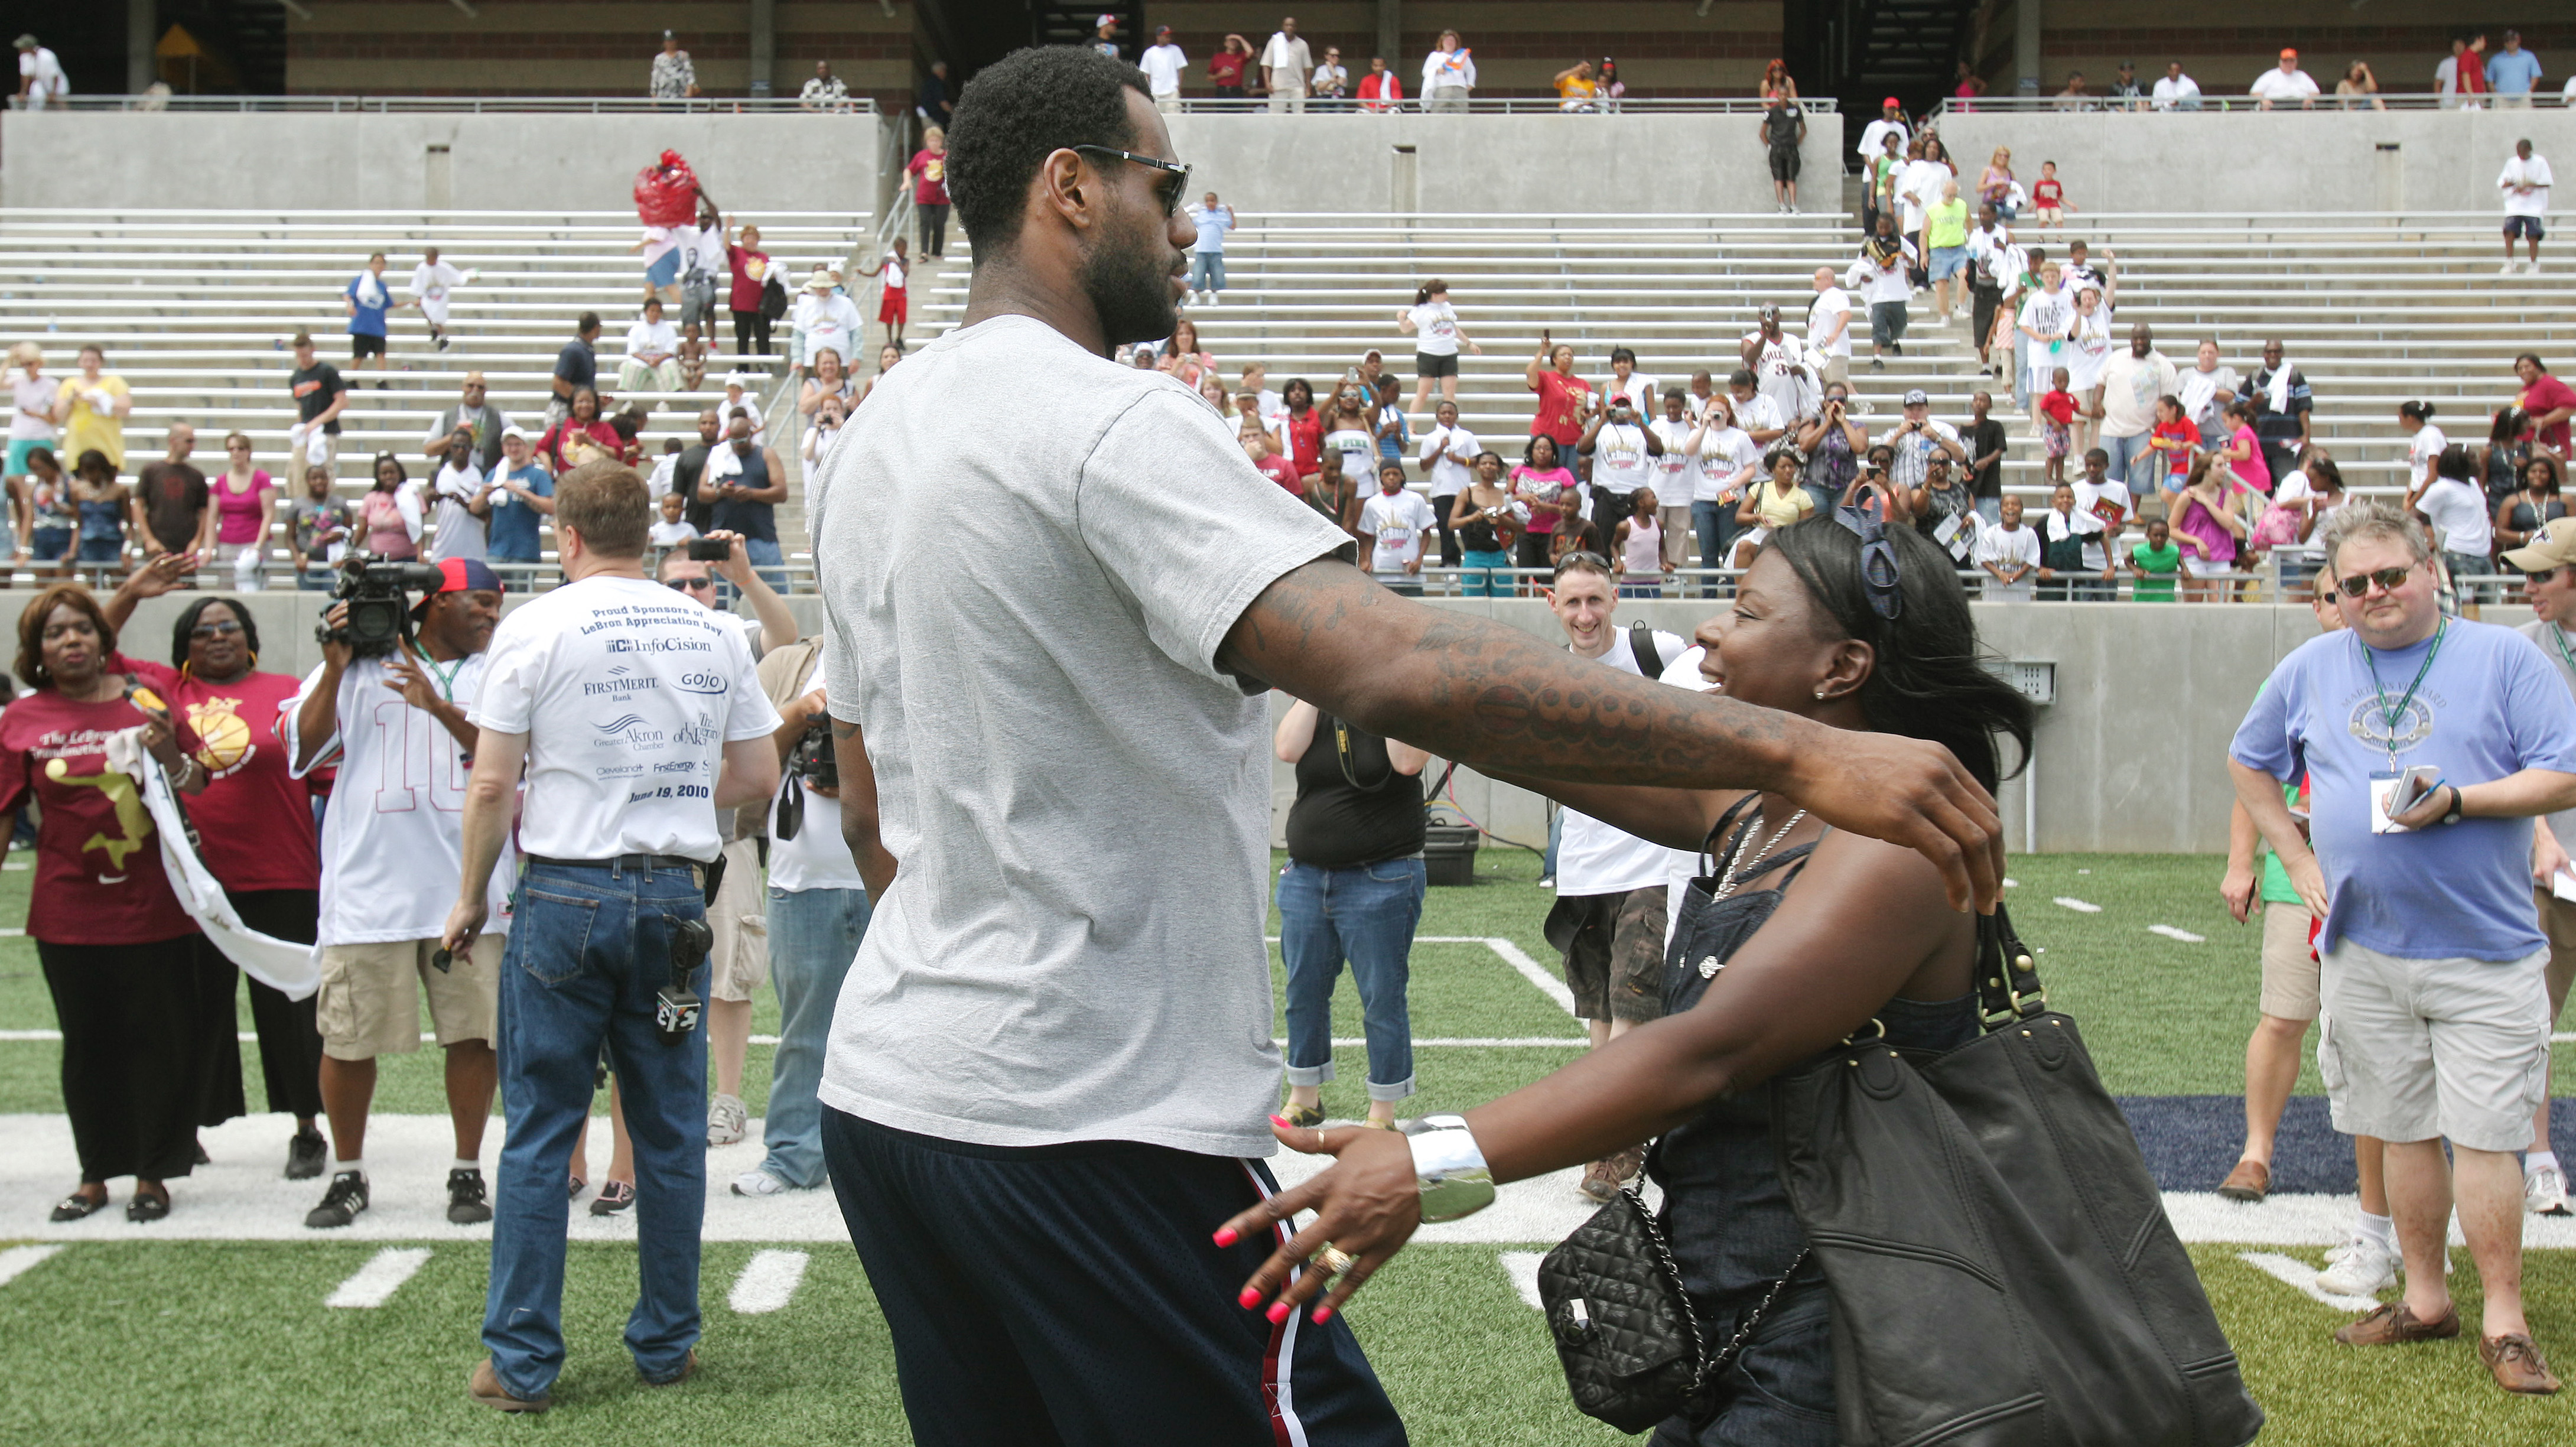 Cleveland Cavaliers LeBron James is hugged by an unidentified family friend in Akron University's InfoCision Stadium June 19, 2010 at the end of a LeBron James Appreciation Day rally where he was honored by receiving a crystal award for Akron's Hometown Hero.  Cavs fans were hoping to persuade James in staying with the Cavs during his free agency quest starting July 1, 2010.  (John Kuntz / The Plain Dealer) 